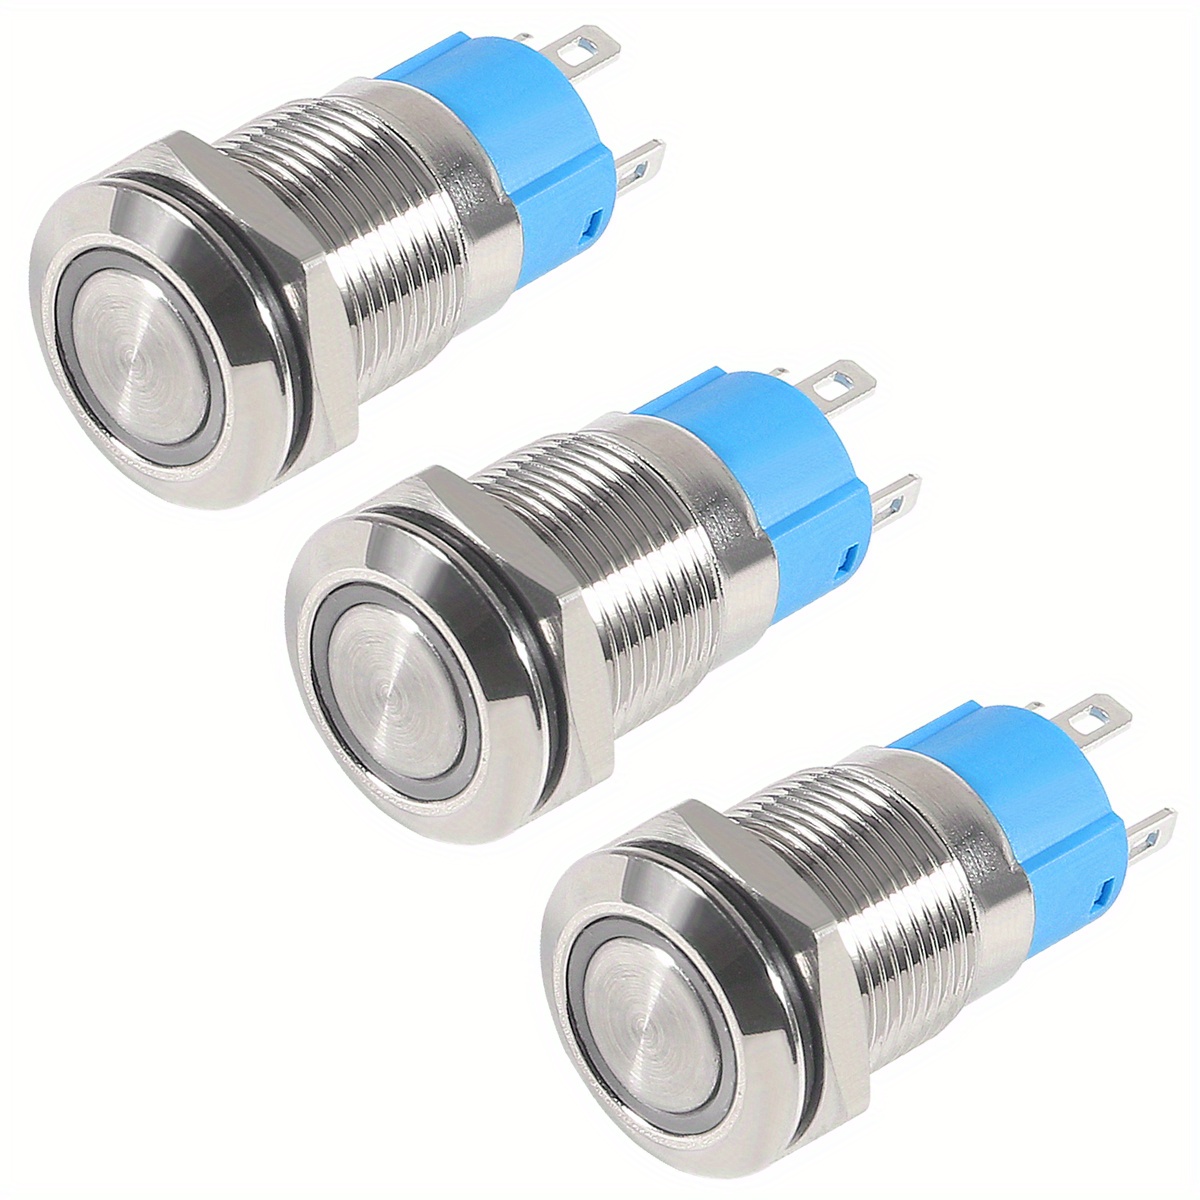 12mm Metal Push Button Switch Momentary / Latching Horn Car Boat IP65  Waterproof